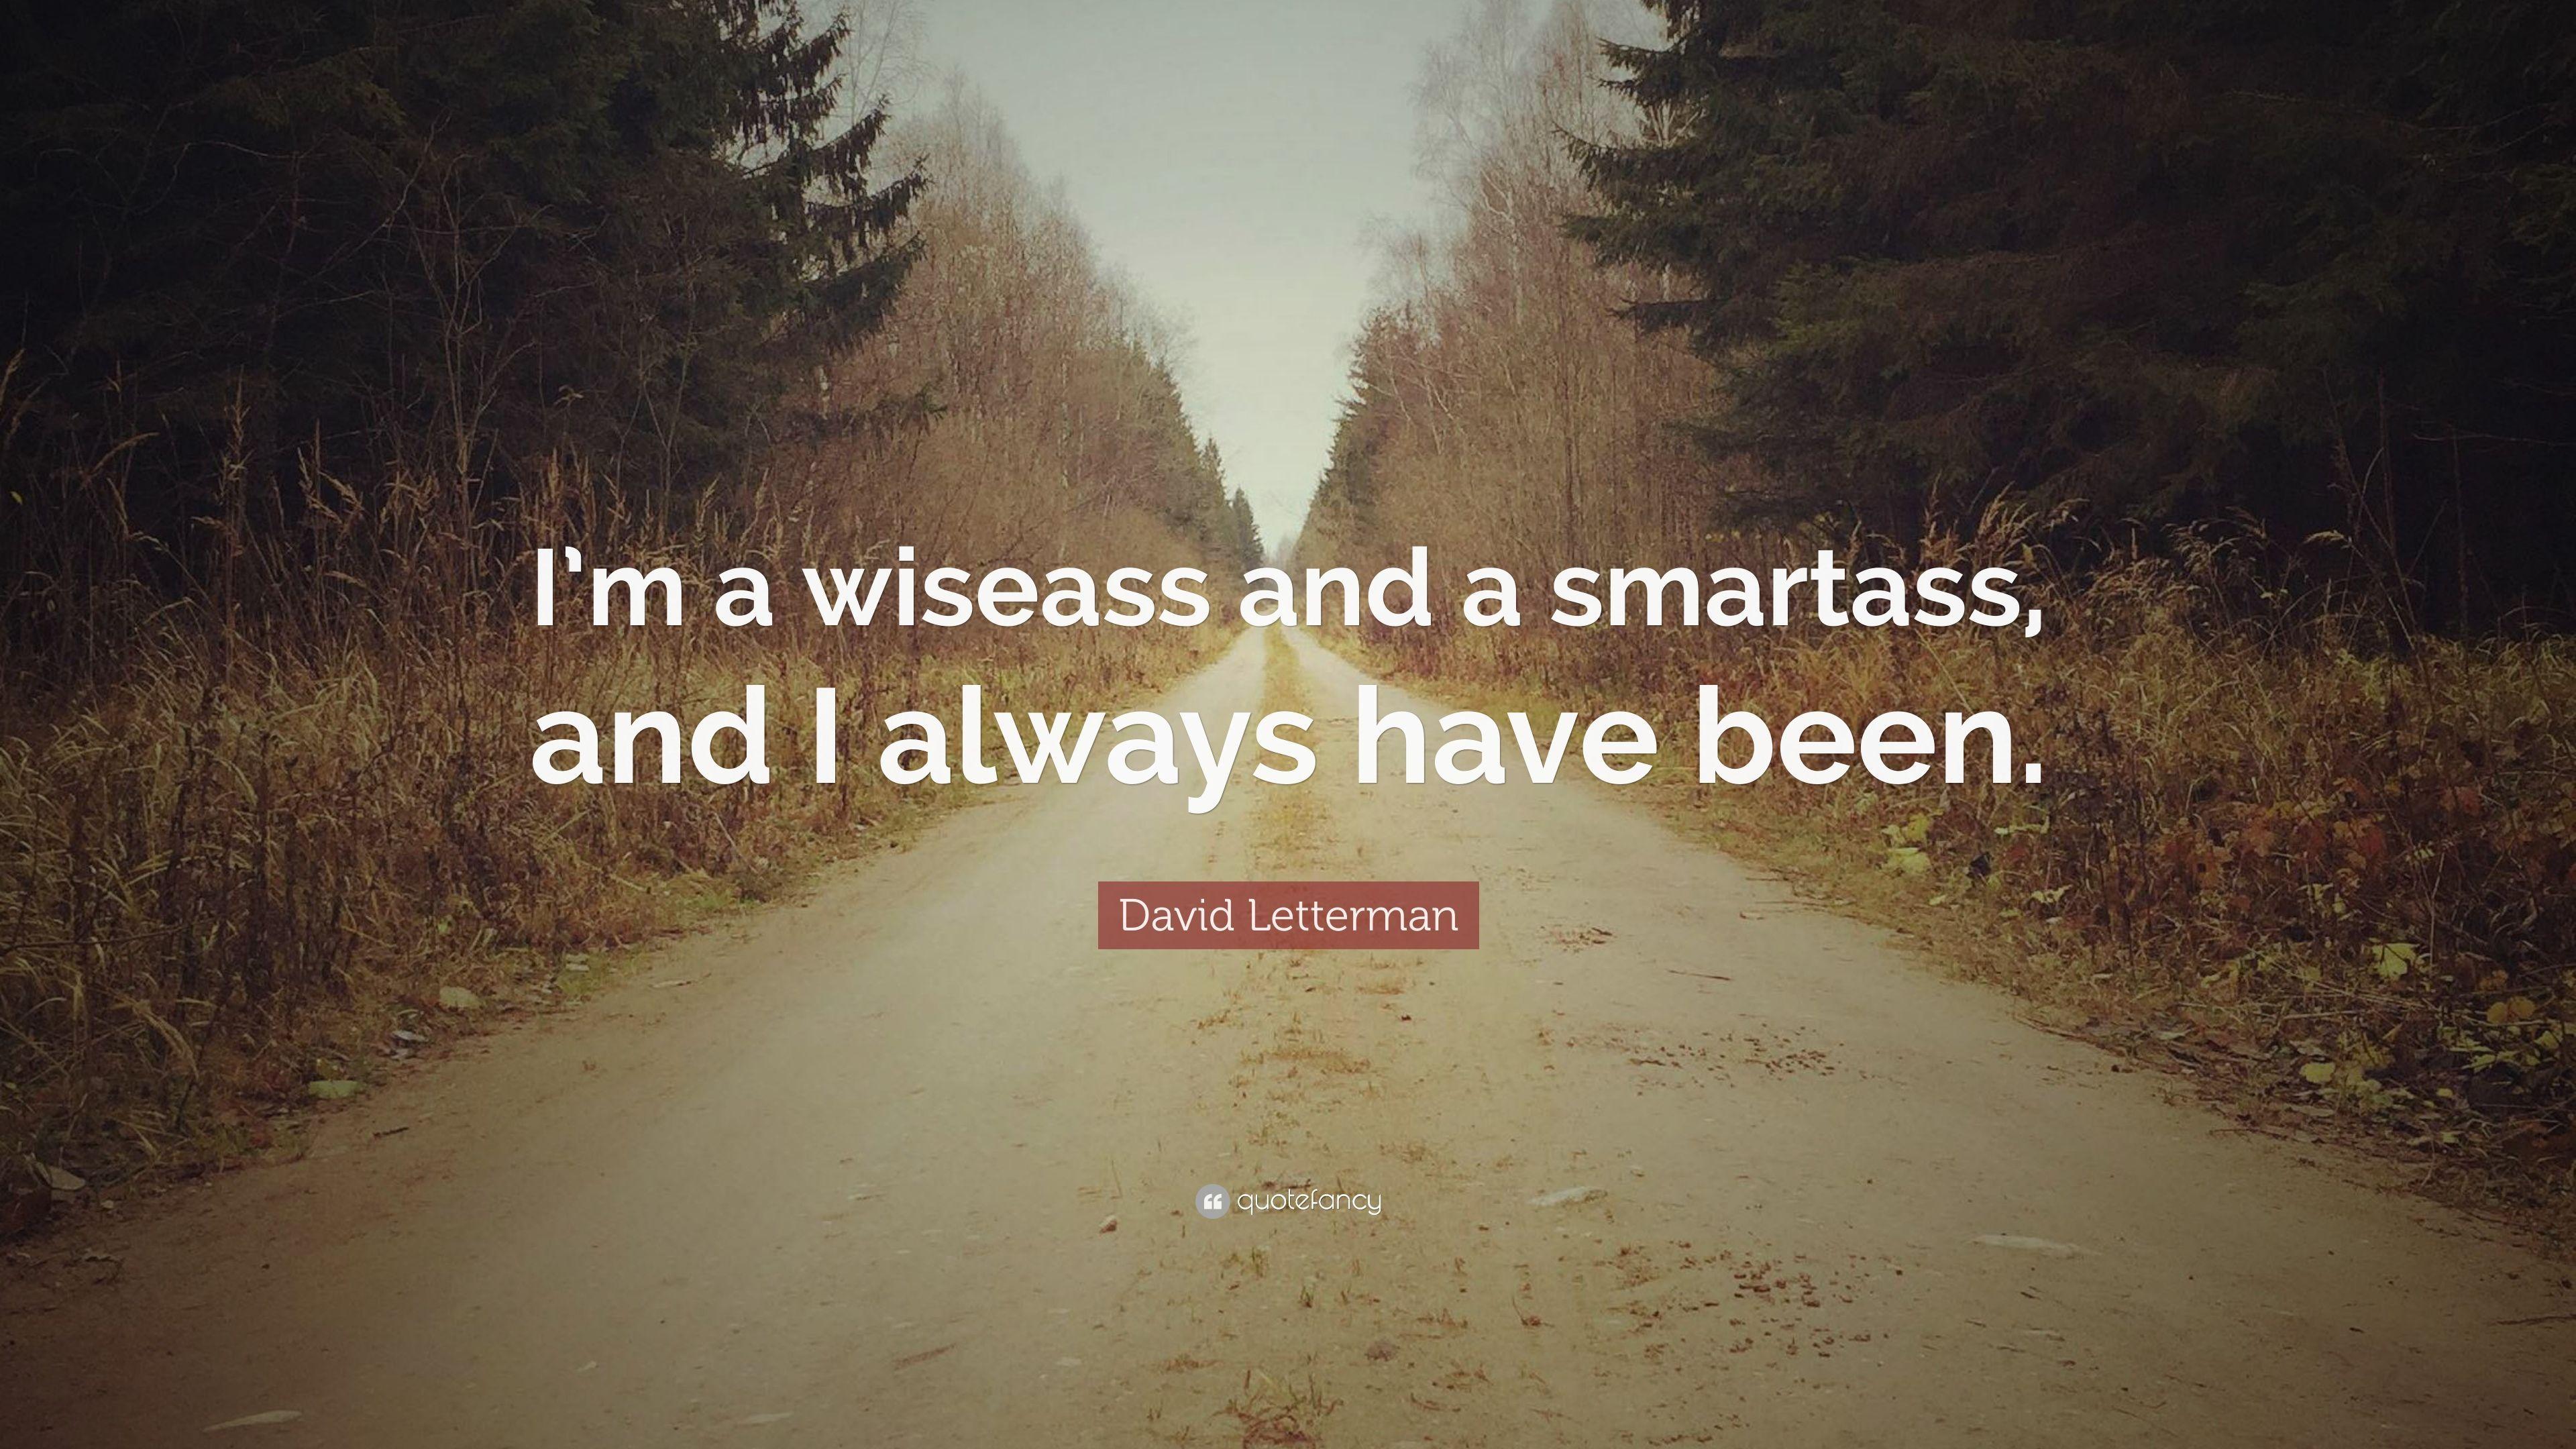 David Letterman Quote: “I'm a wiseass and a smartass, and I always